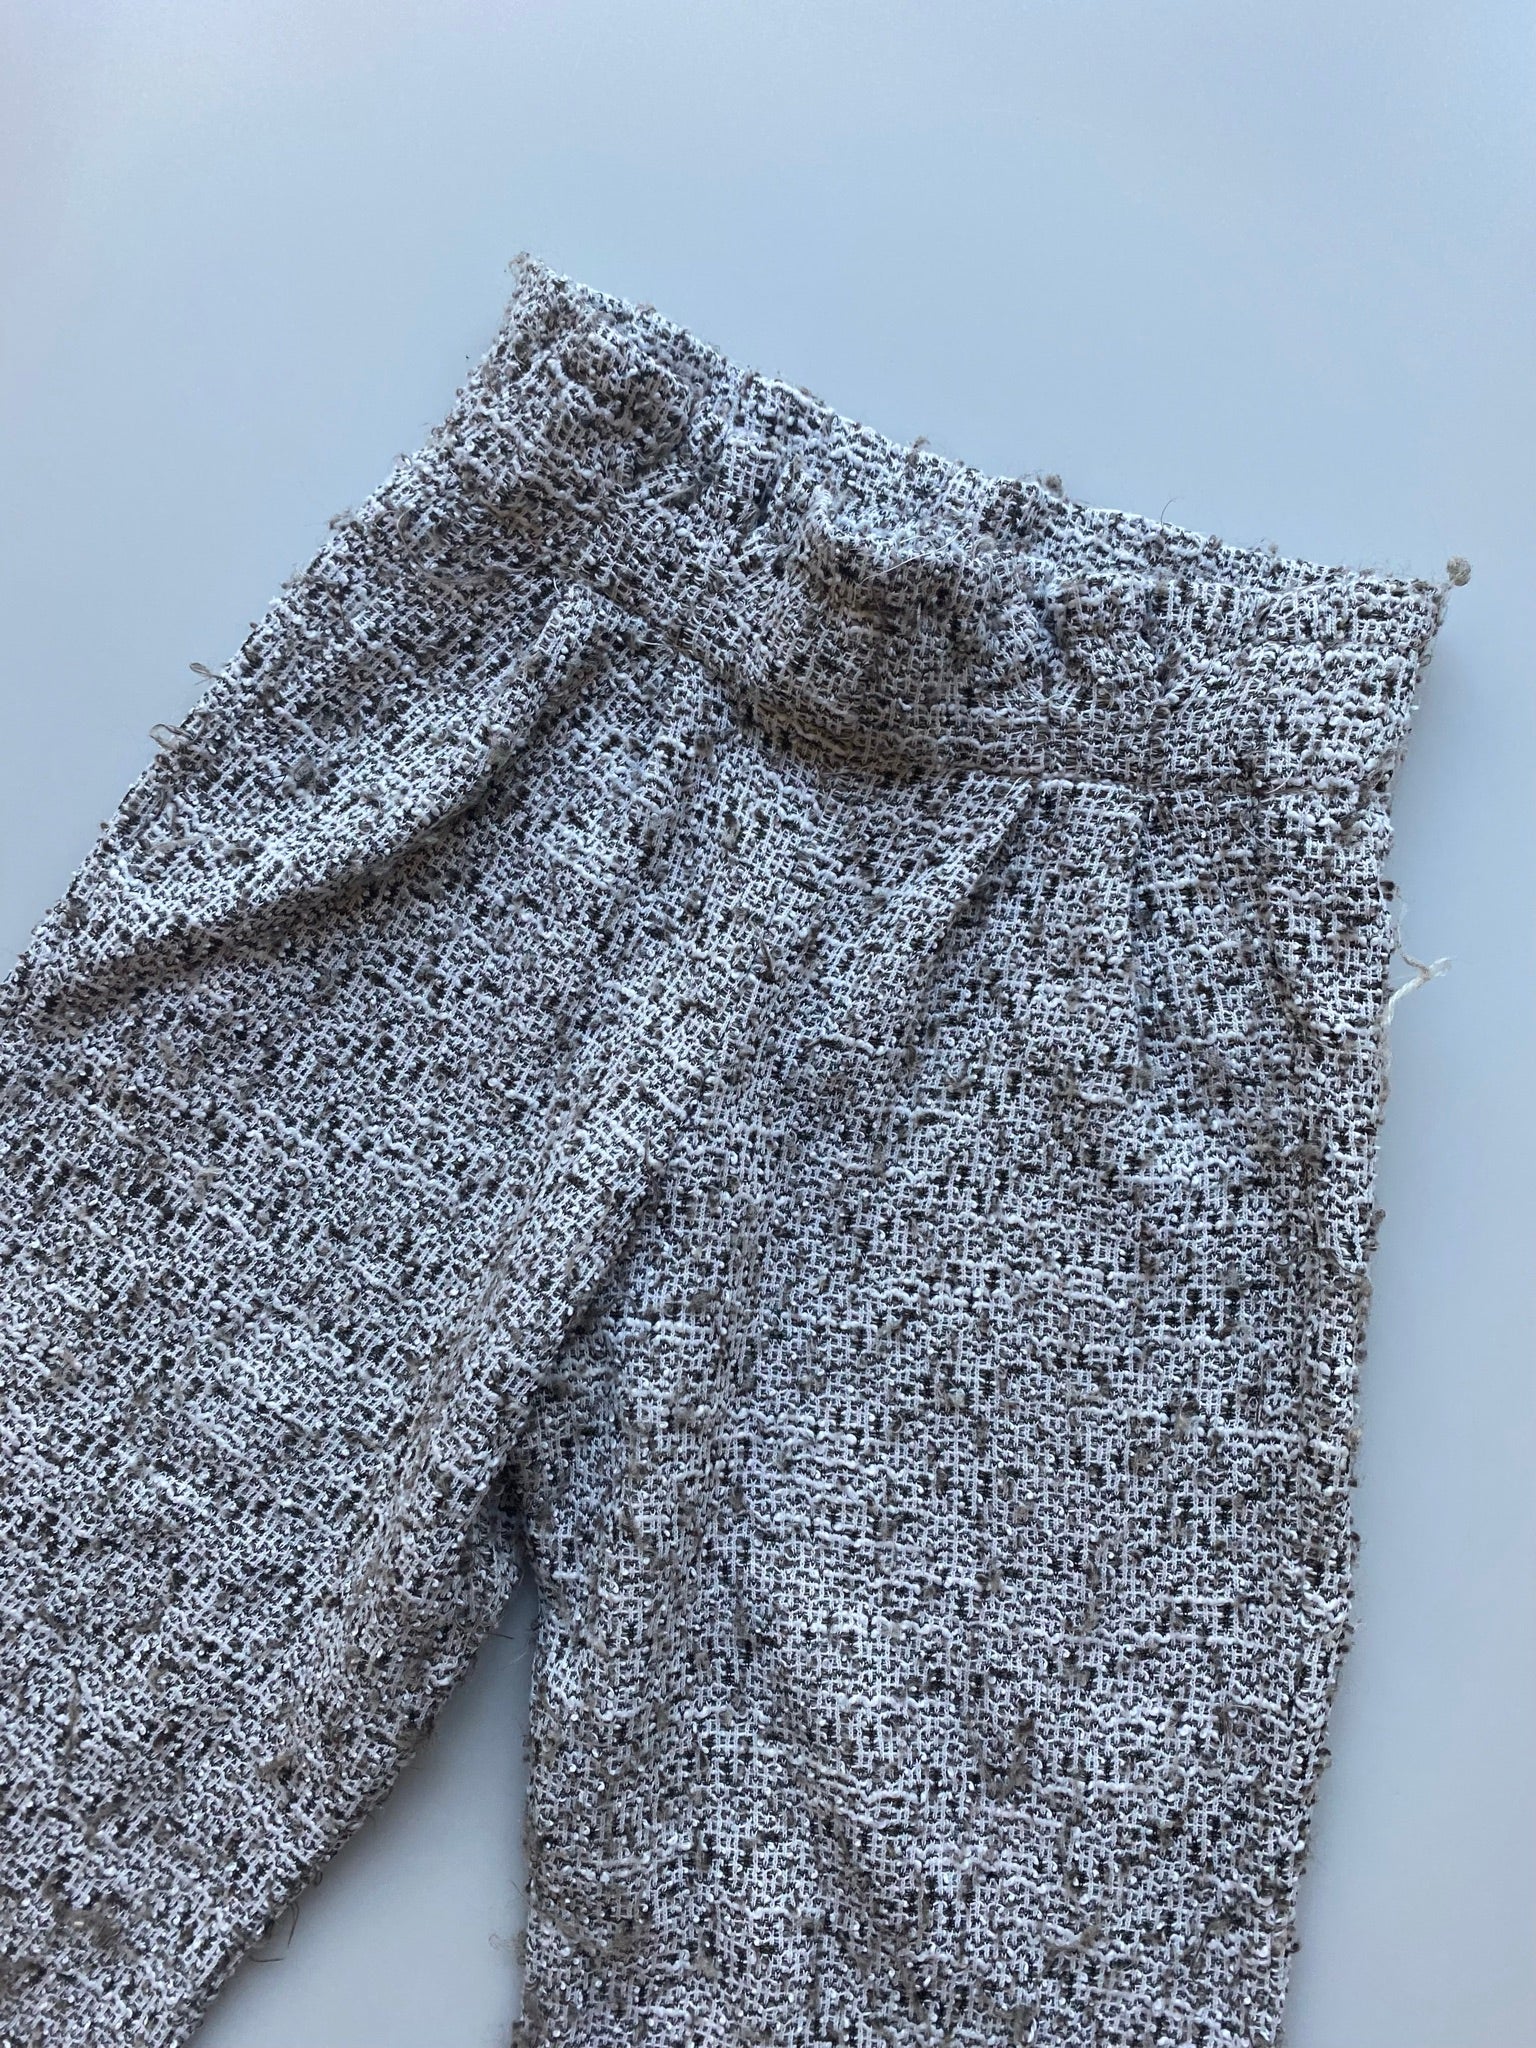 Zara Knitted Paper Bag Waist Culottes Age 5